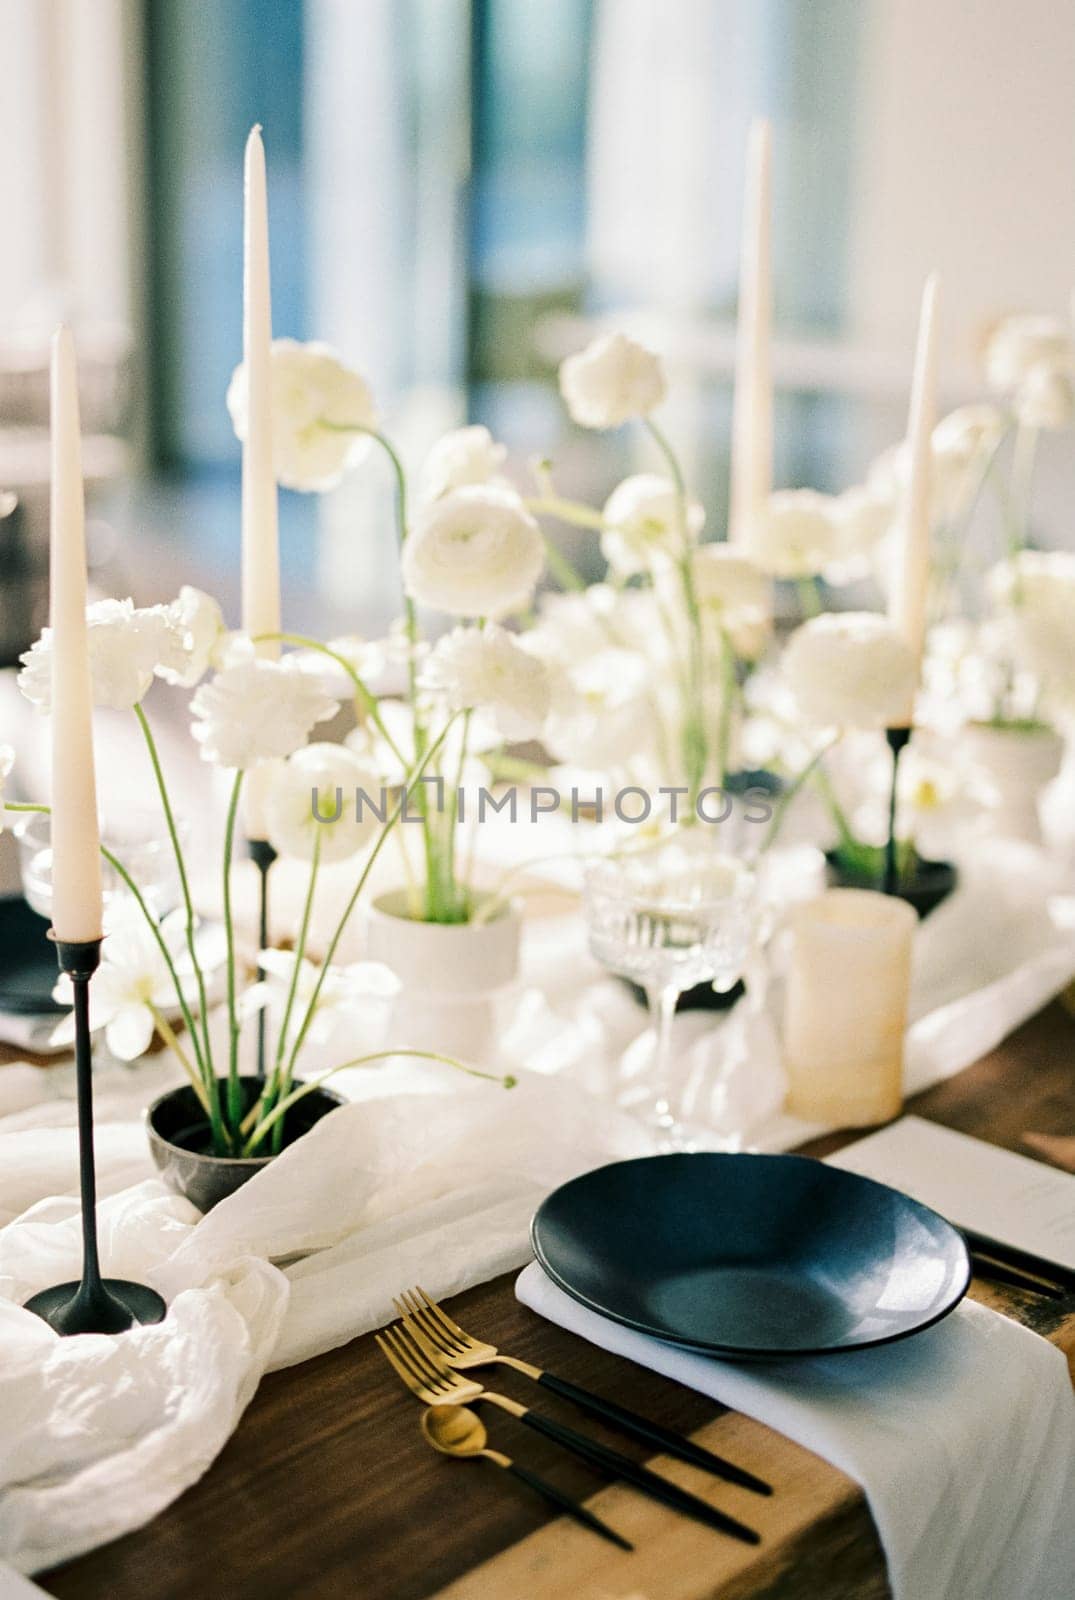 Black plates stand on a wooden table next to white bouquets of flowers on a narrow tablecloth. High quality photo